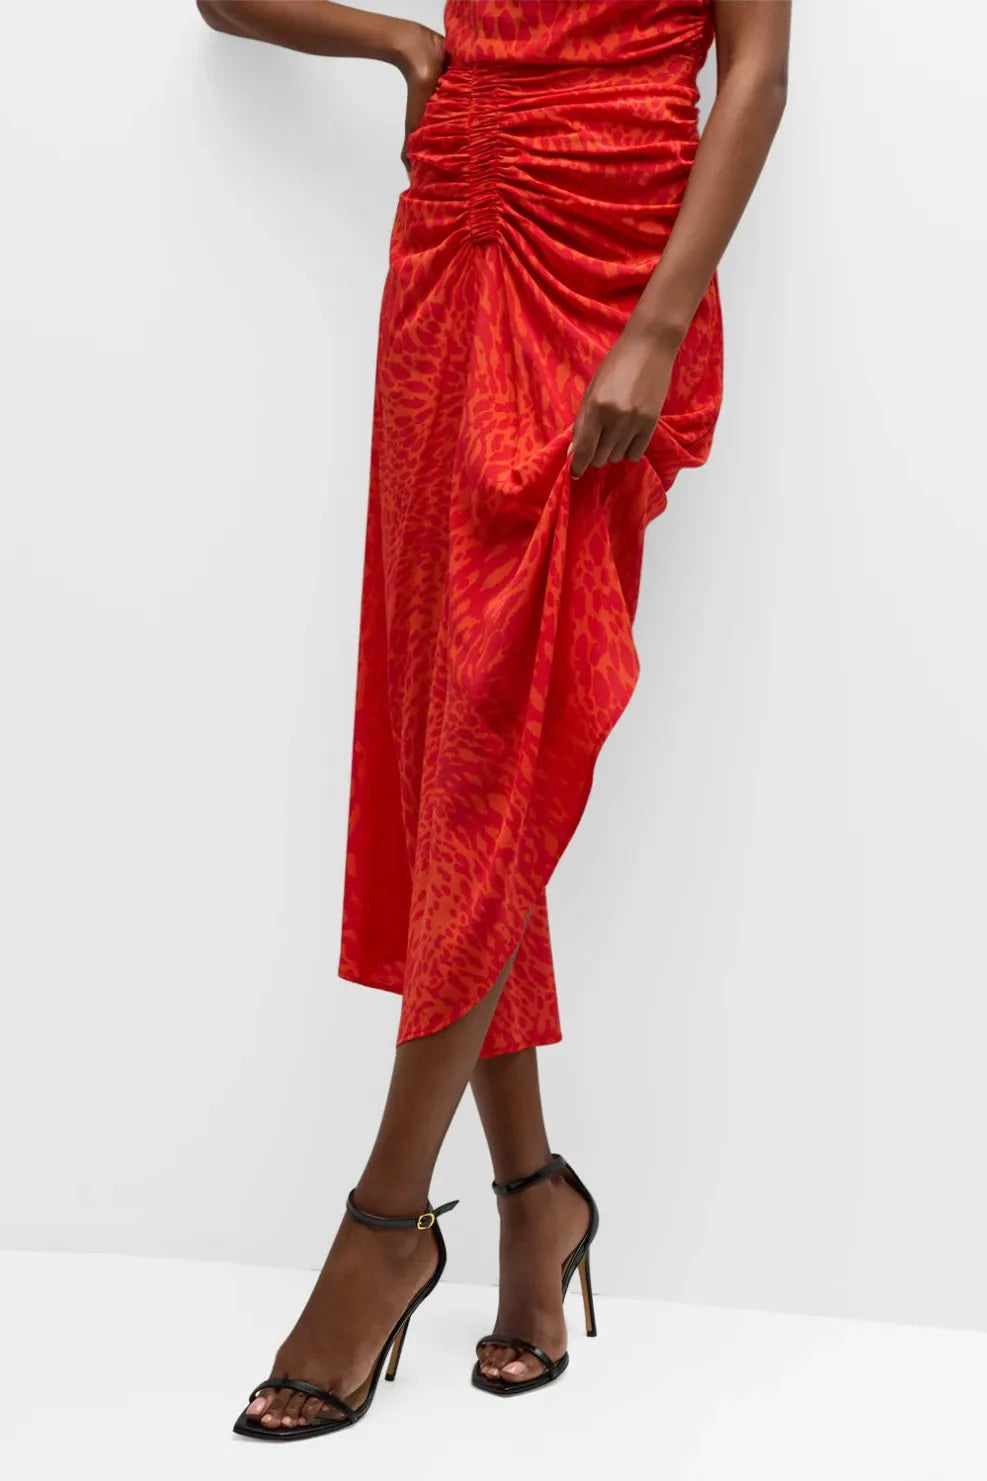 A.L.C. - Adeline Skirt in Vibrant Red